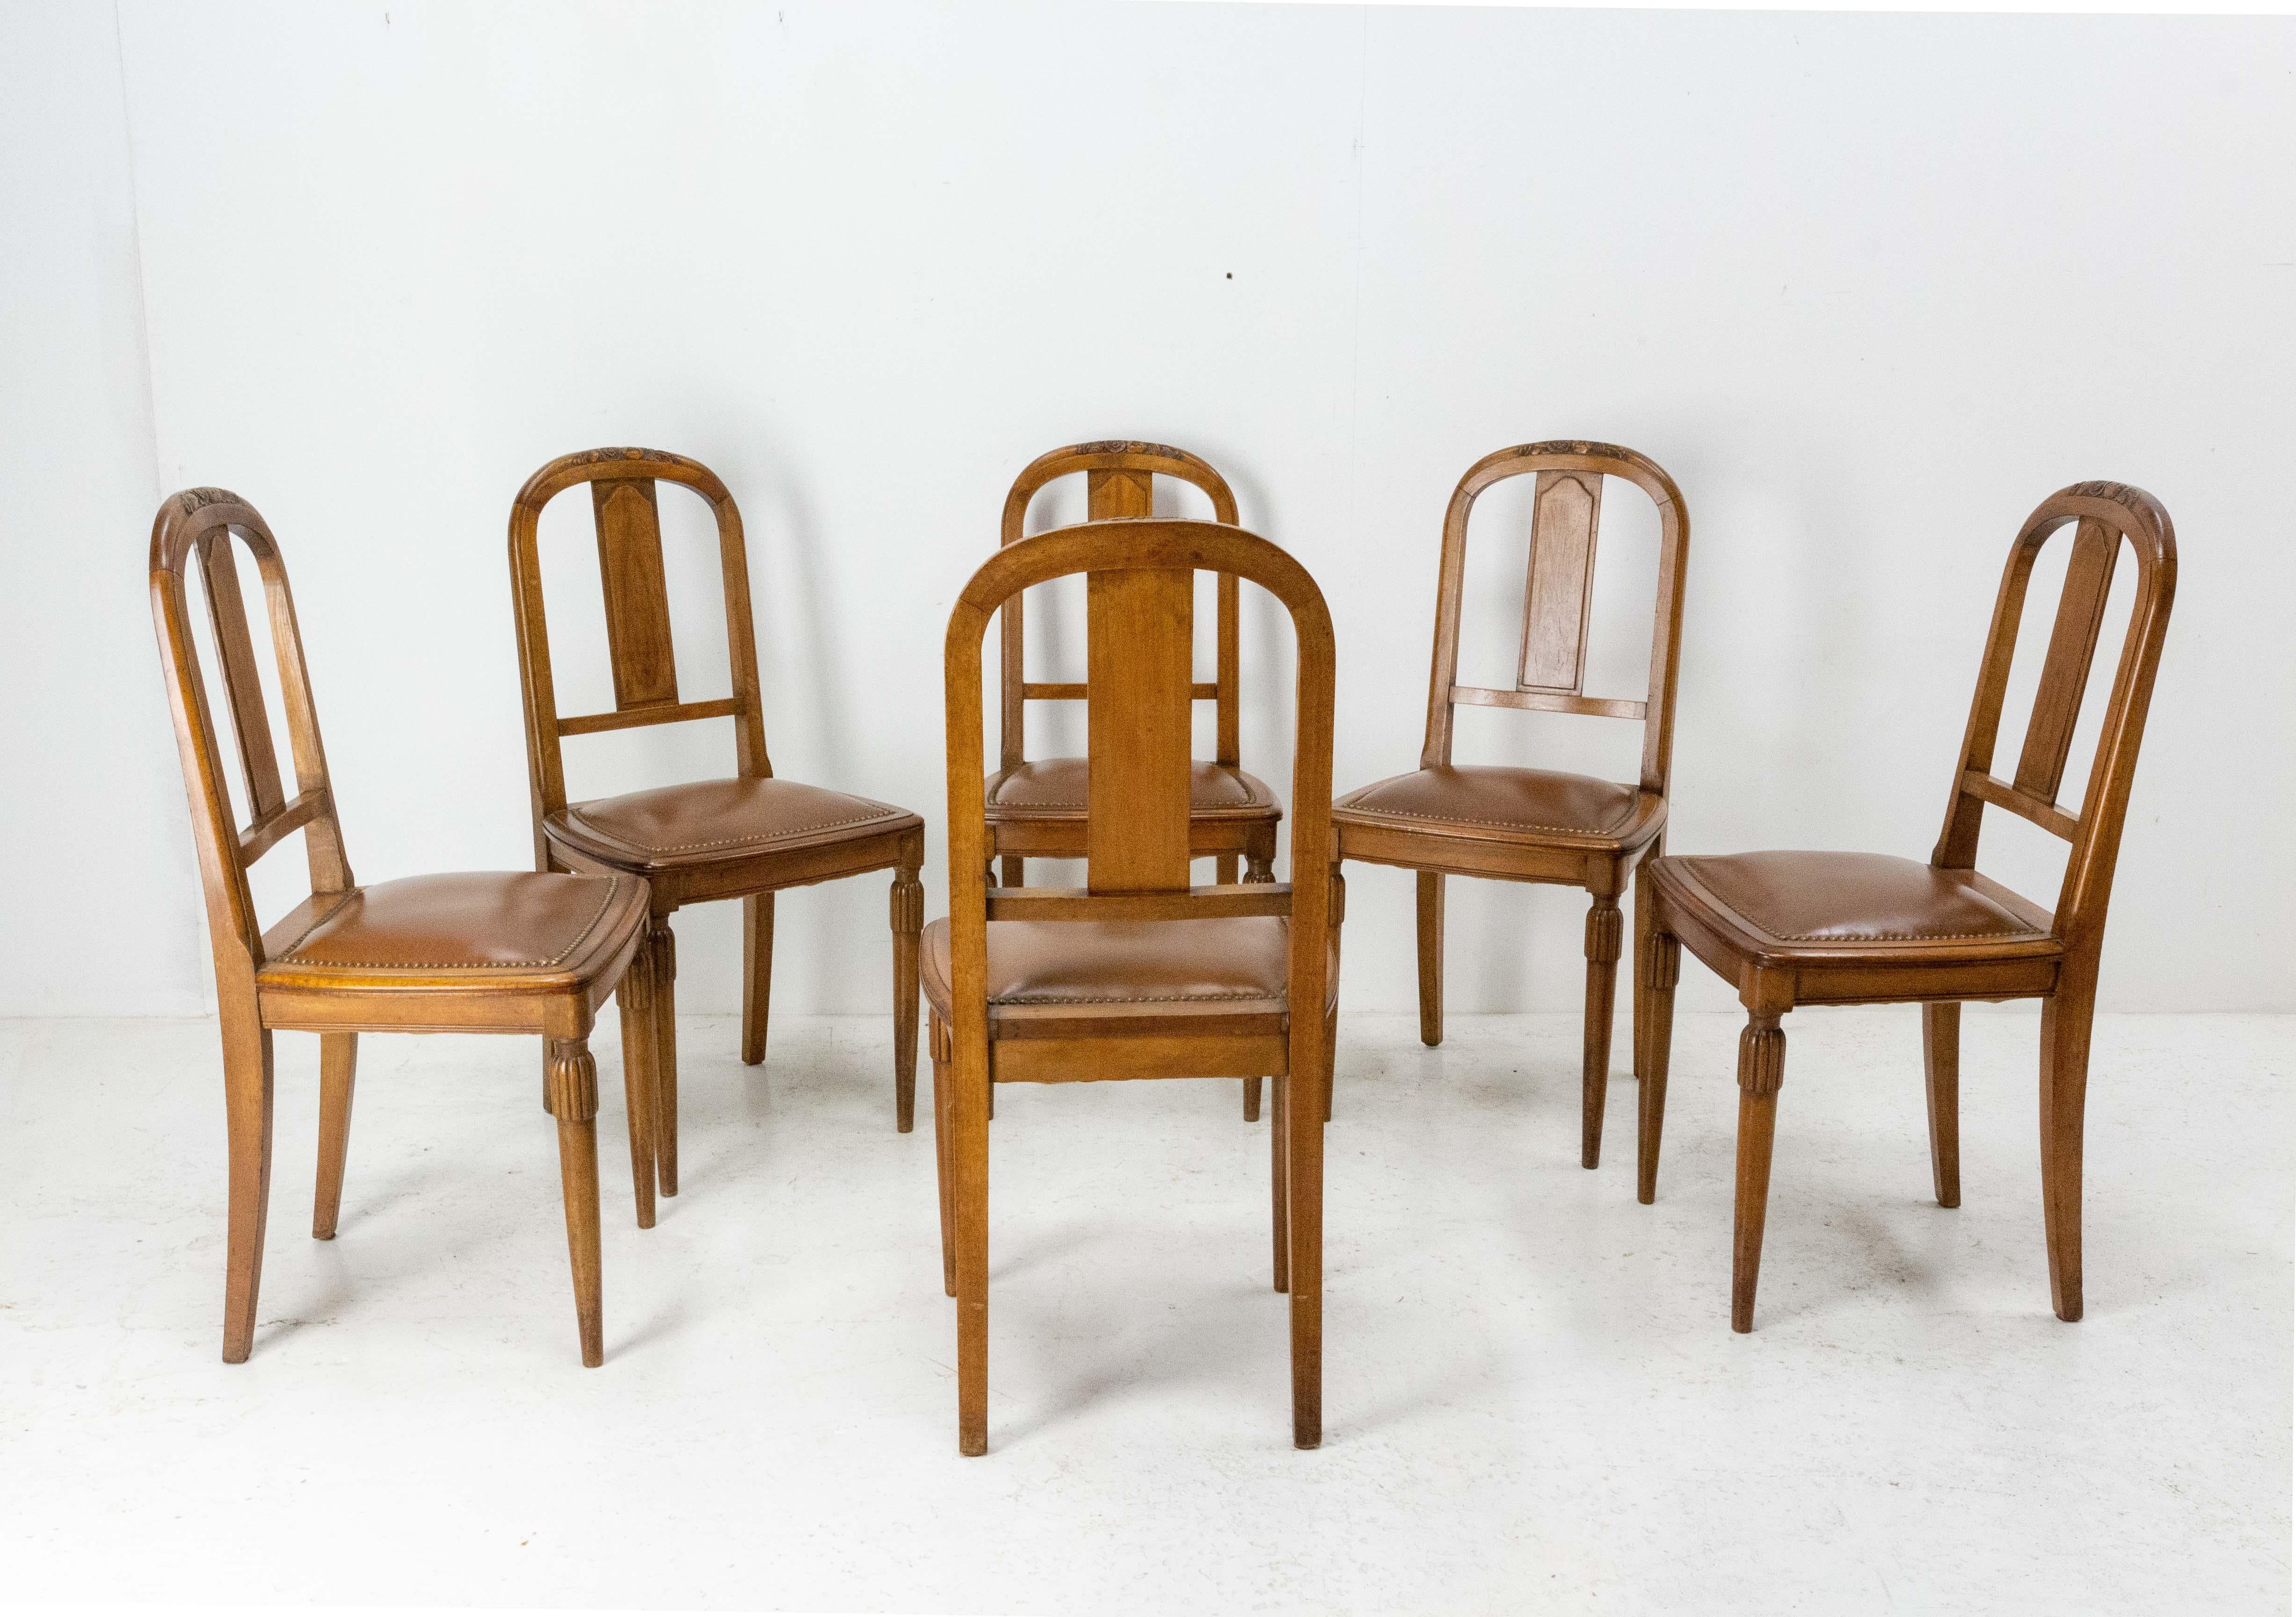 Set of six French Art Deco dining chairs, circa 1930.
To be used has it is if you want to keep the patina or to restore
walnut and skai.
Sober and chic with a floral motif on the back.
Original antique condition.
Frames are sound and